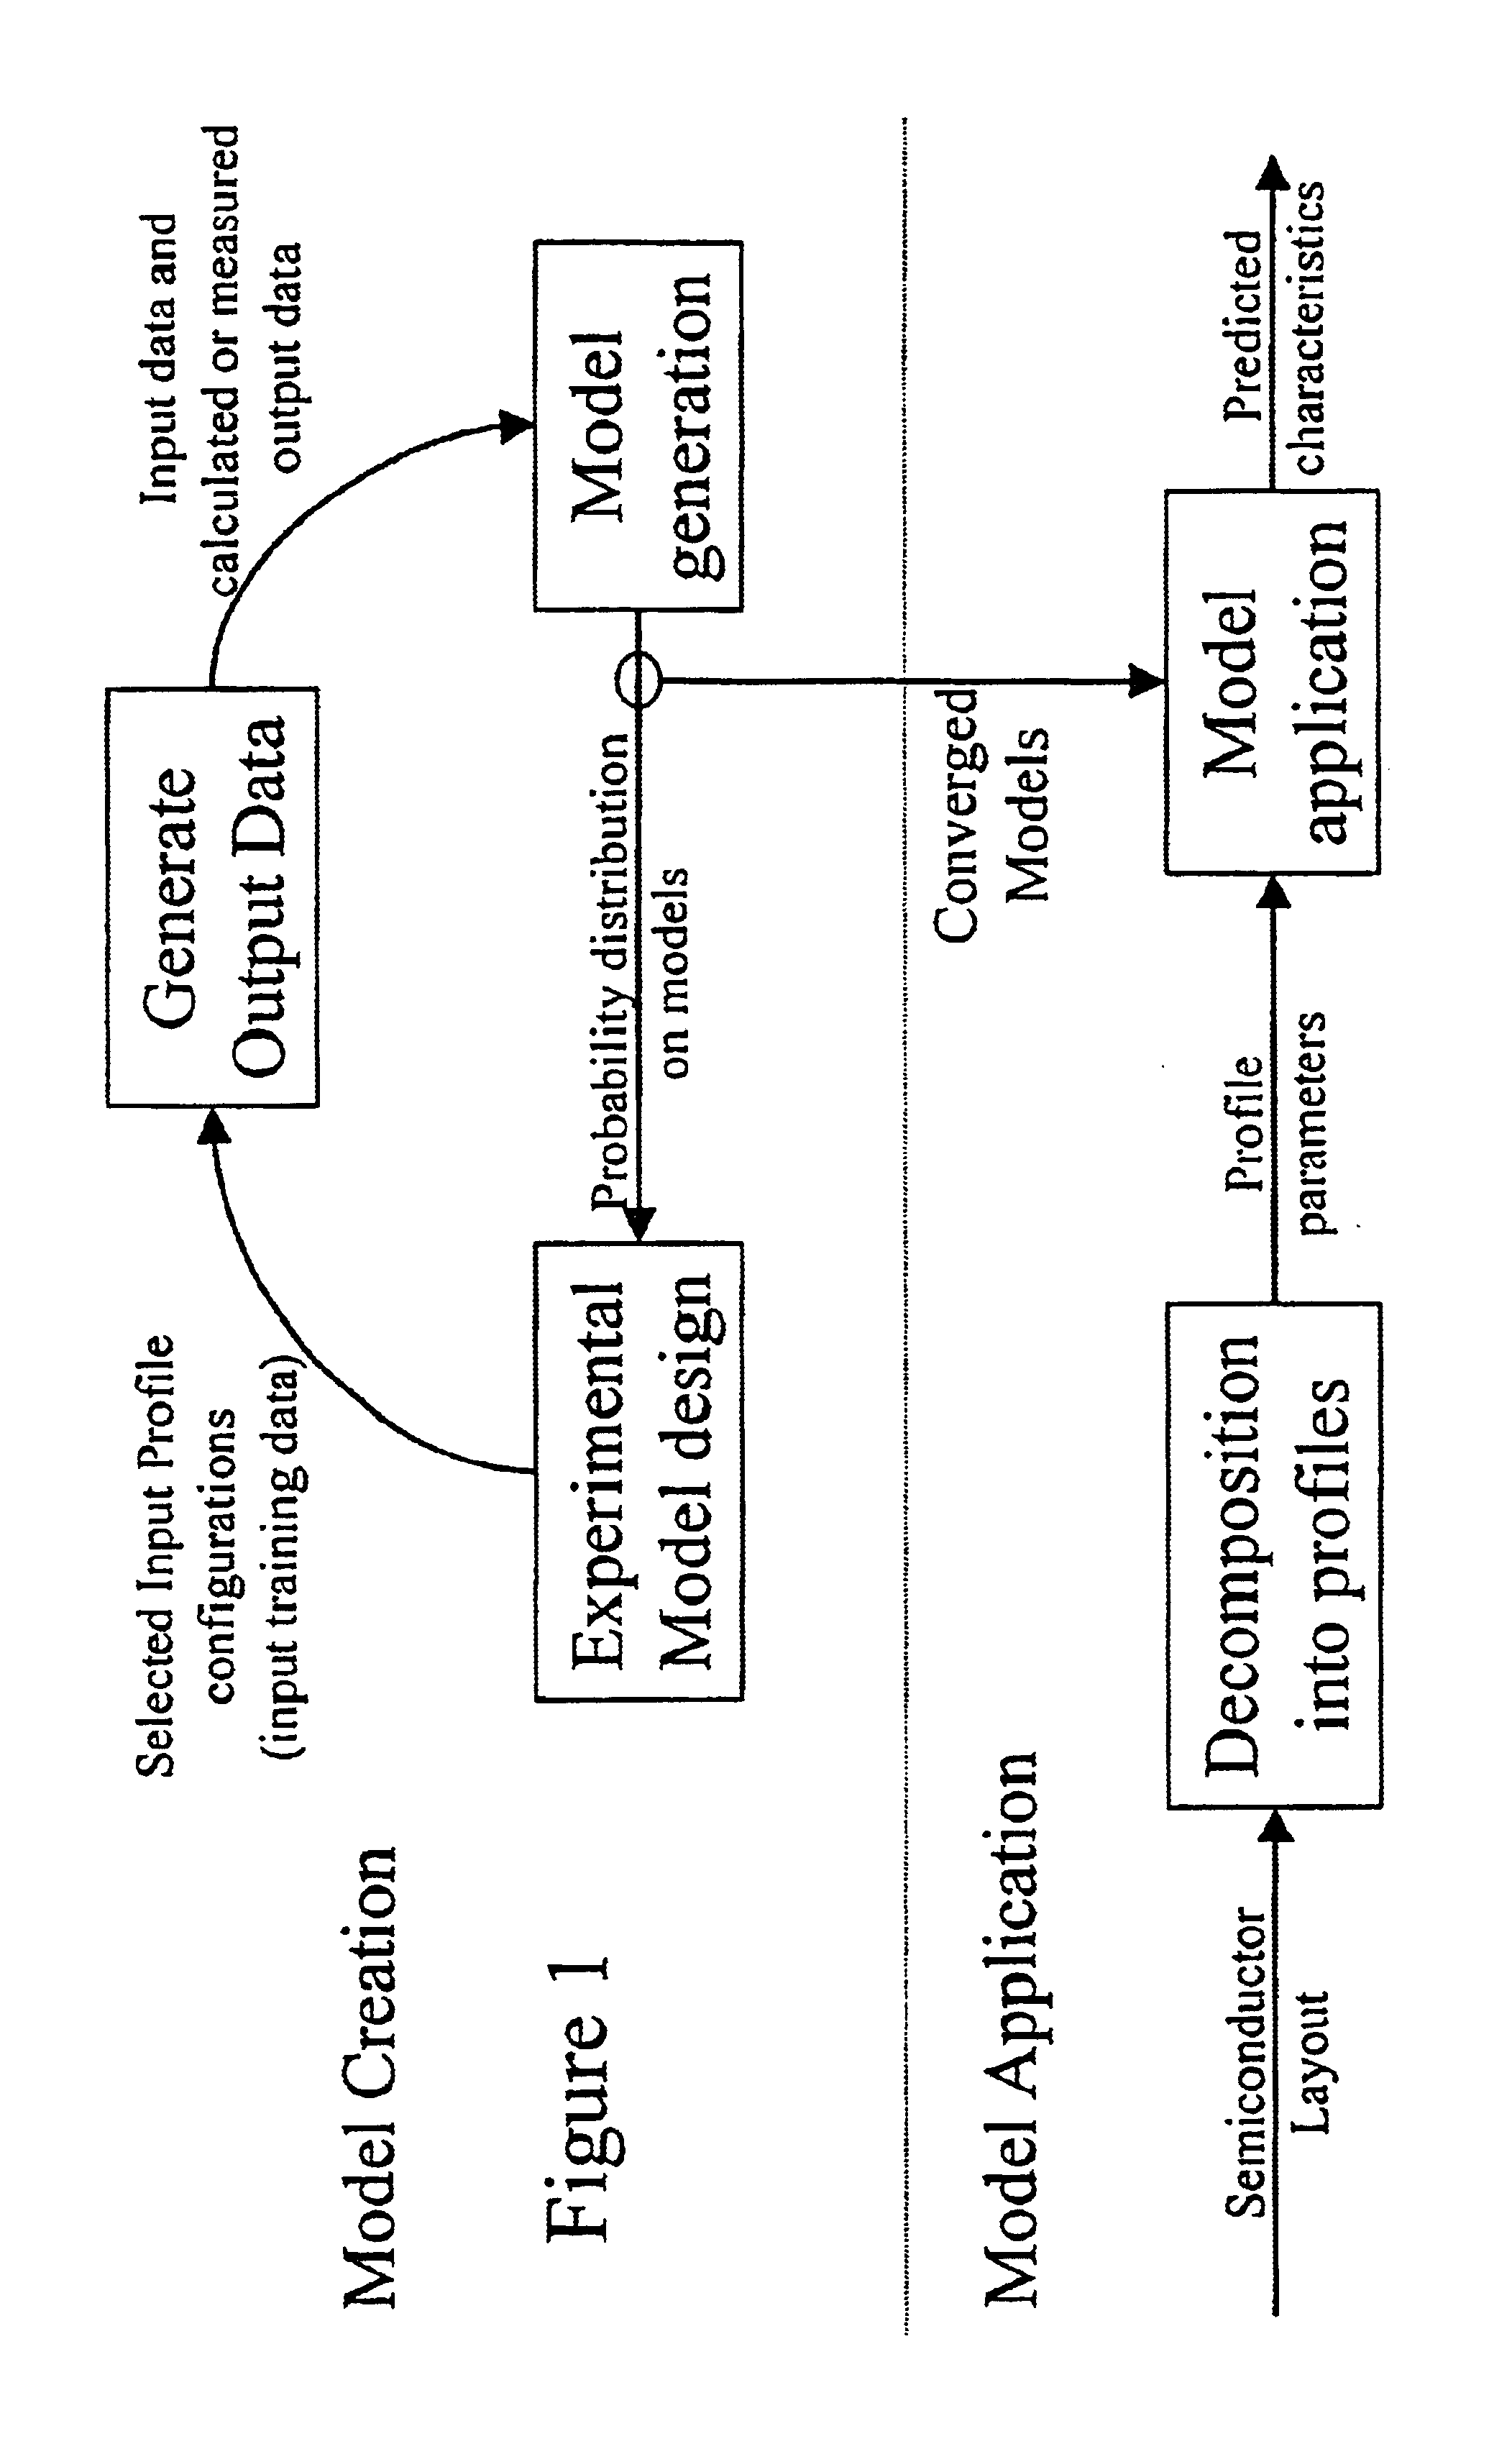 Method and apparatus for creating an extraction model using Bayesian inference